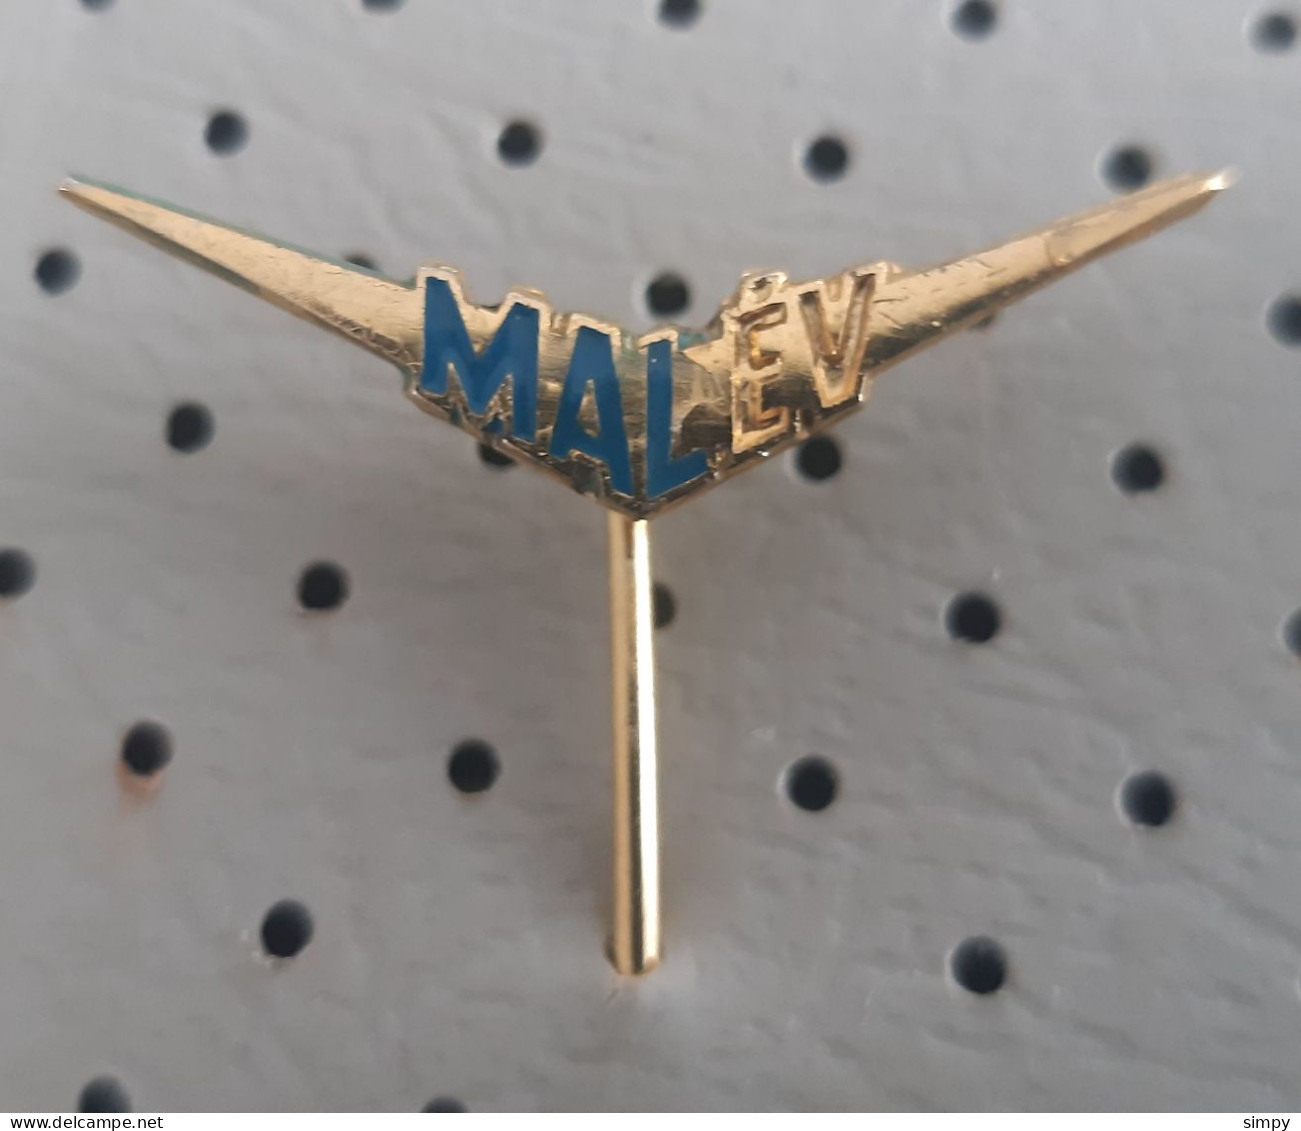 MALEV Hungarian Airlines Aero Transport  Air Carrier Plane Airplain Hungary Pin - Airplanes